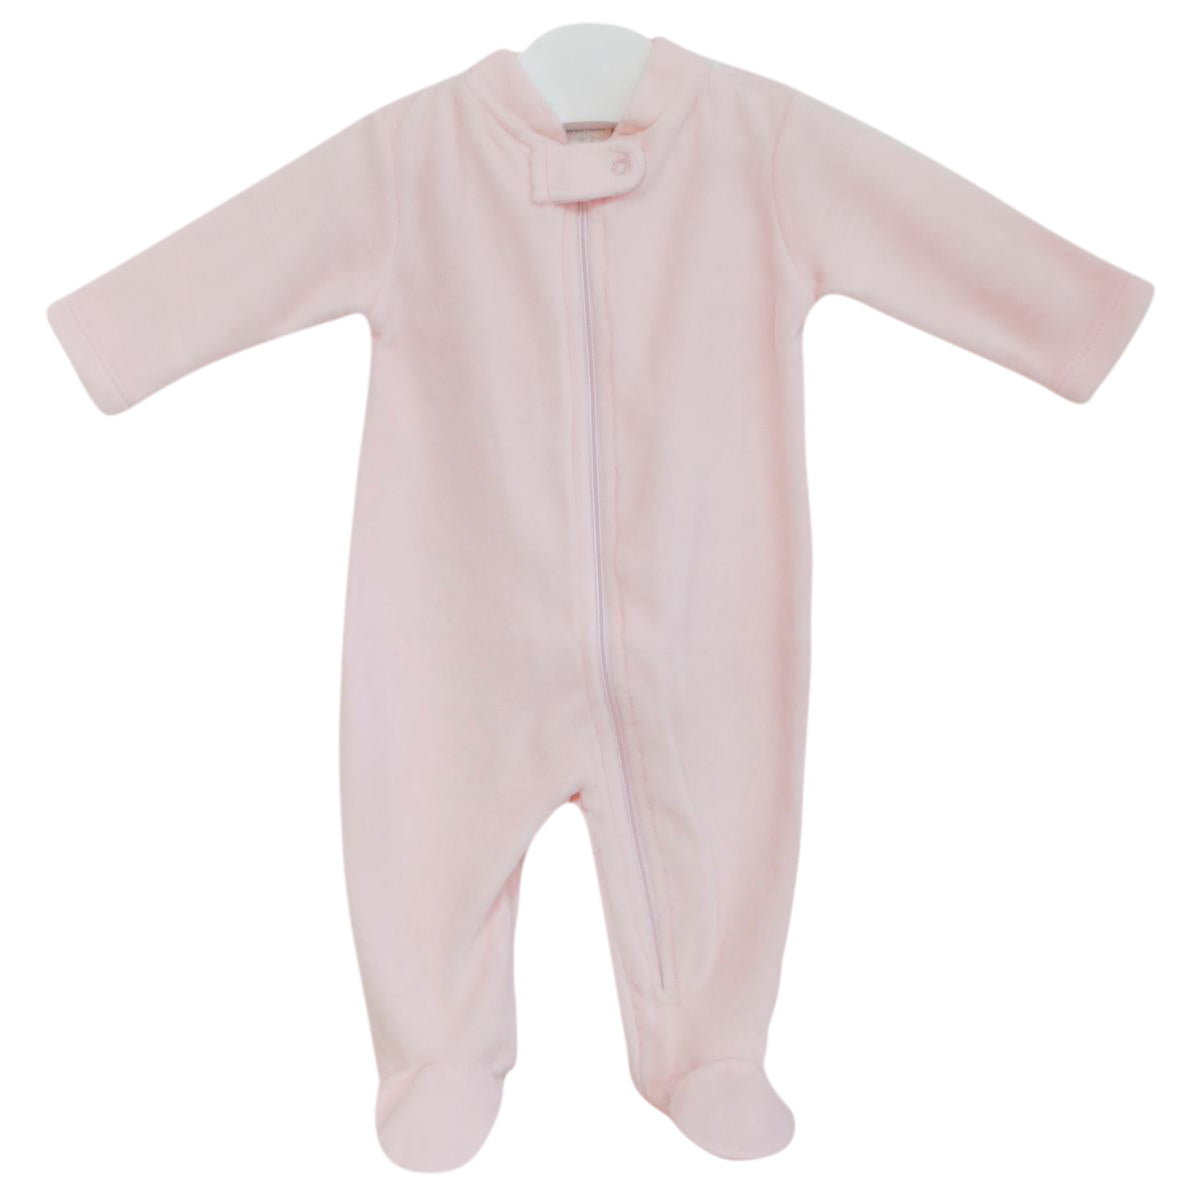 Pink pima cotton velour baby girl footie with zippers